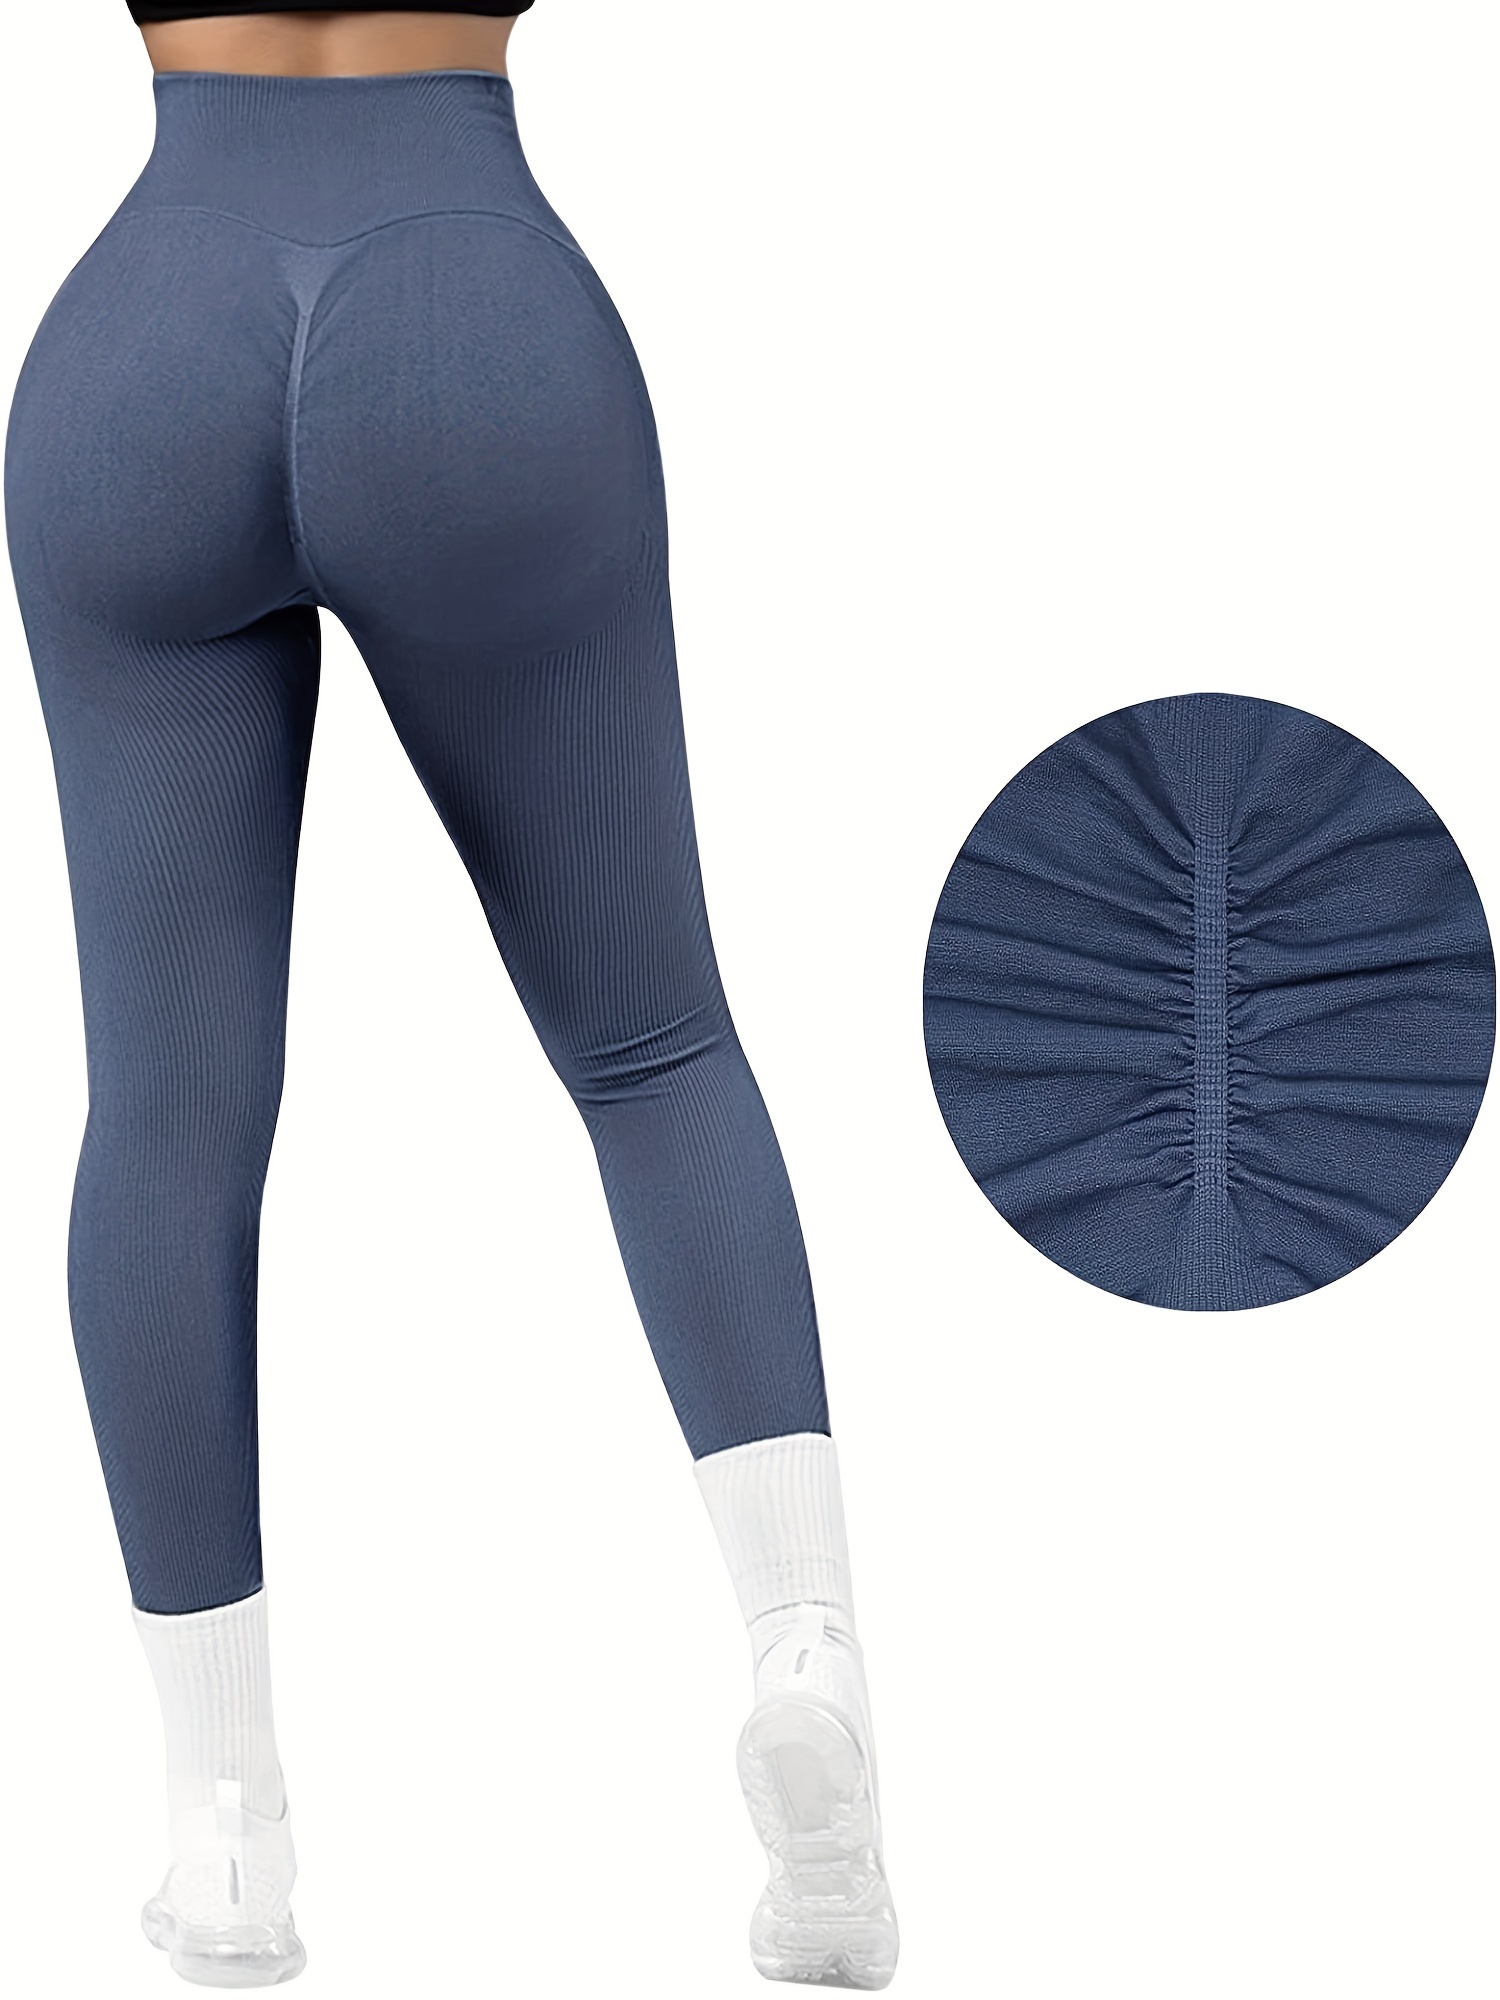 Women Stretch Compression Leggings Pants with Pockets High Waist Sportswear  Tummy Control Workout Althetic Leggings for Running Yoga Fitness